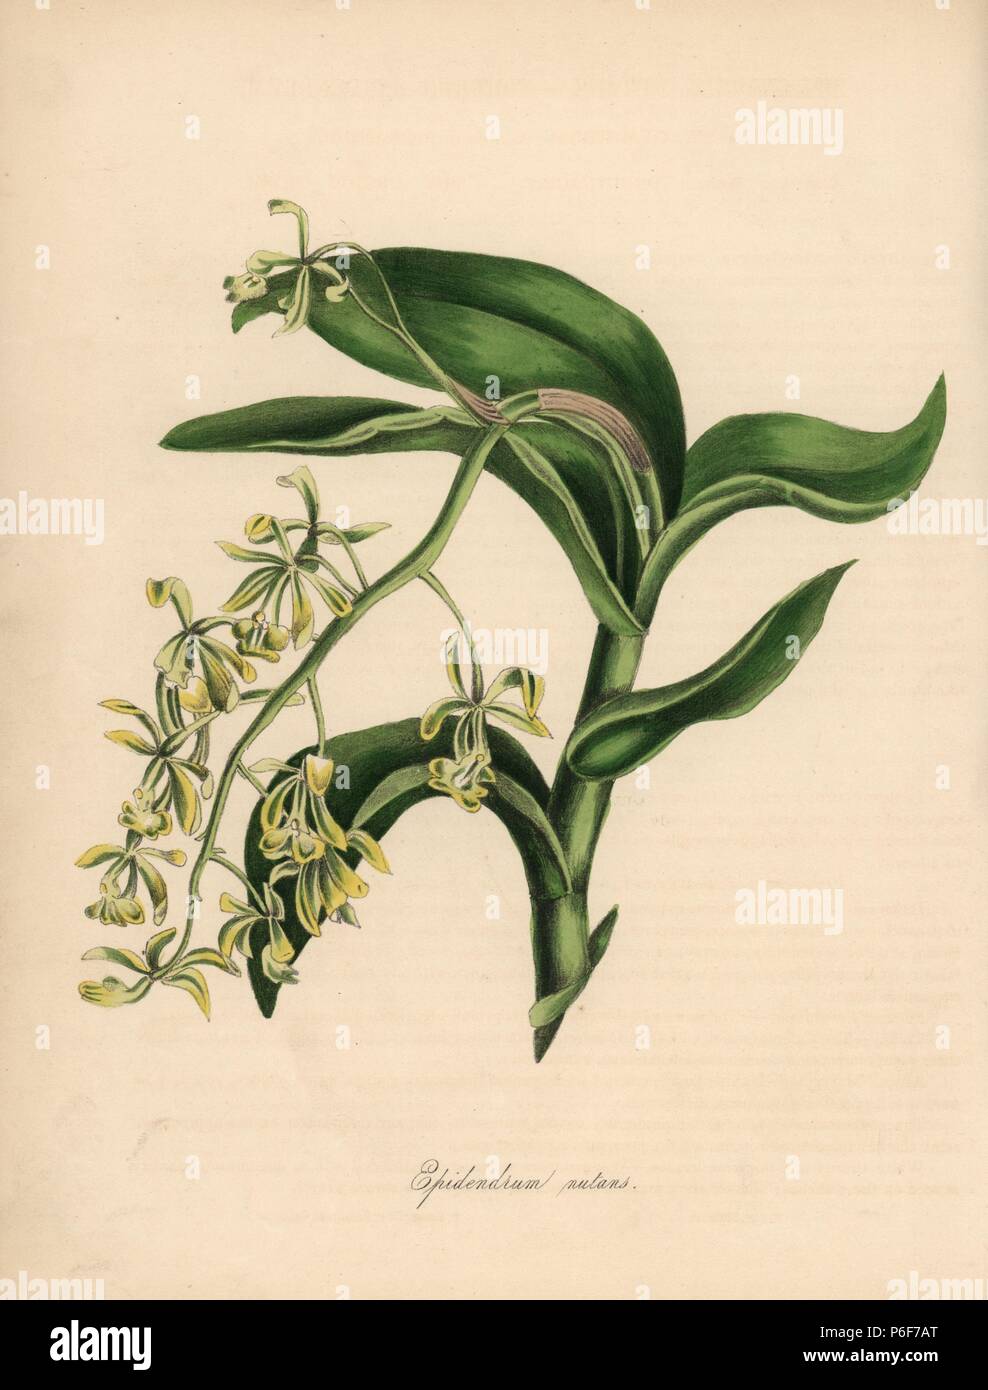 Nodding epidendrum orchid, Epidendrum nutans. Handcoloured zincograph by C. Chabot drawn by Miss M. A. Burnett from her 'Plantae Utiliores: or Illustrations of Useful Plants,' Whittaker, London, 1842. Miss Burnett drew the botanical illustrations, but the text was chiefly by her late brother, British botanist Gilbert Thomas Burnett (1800-1835). Stock Photo